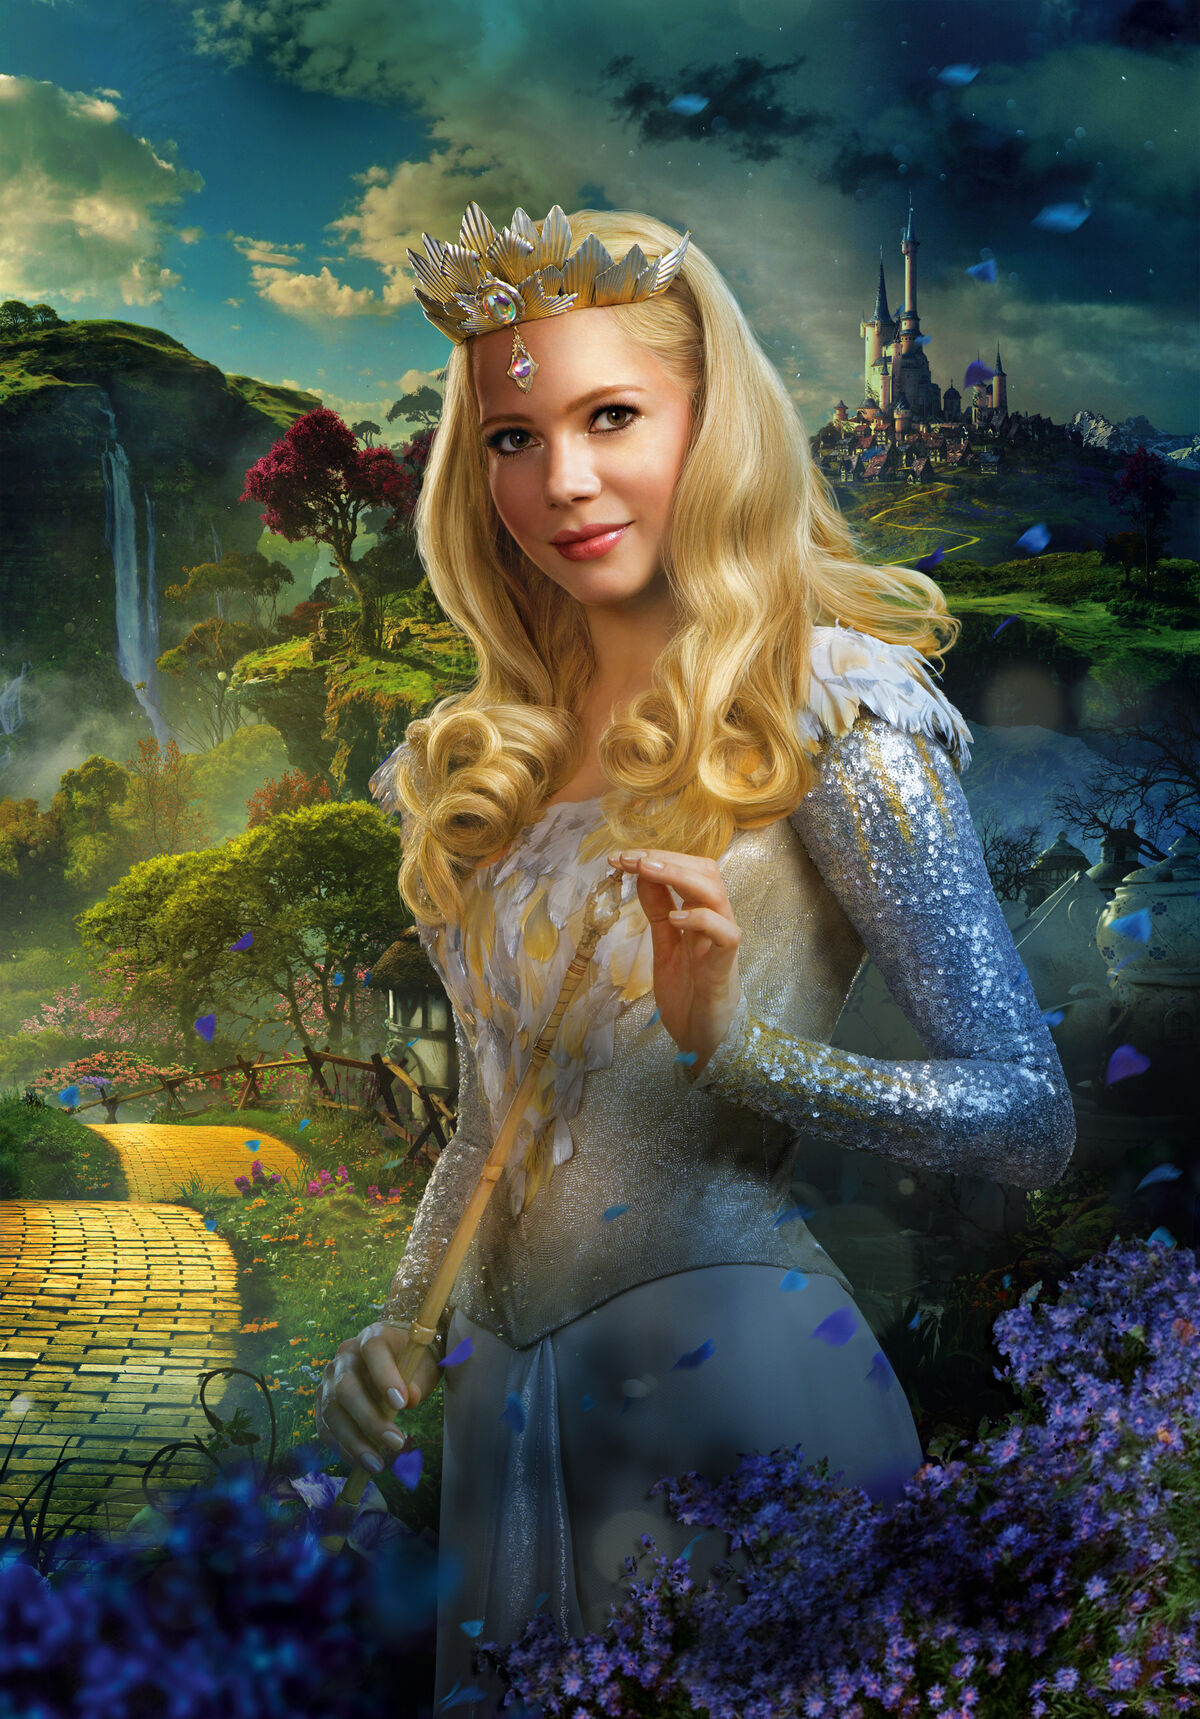 oz the great and powerful evanora and glinda